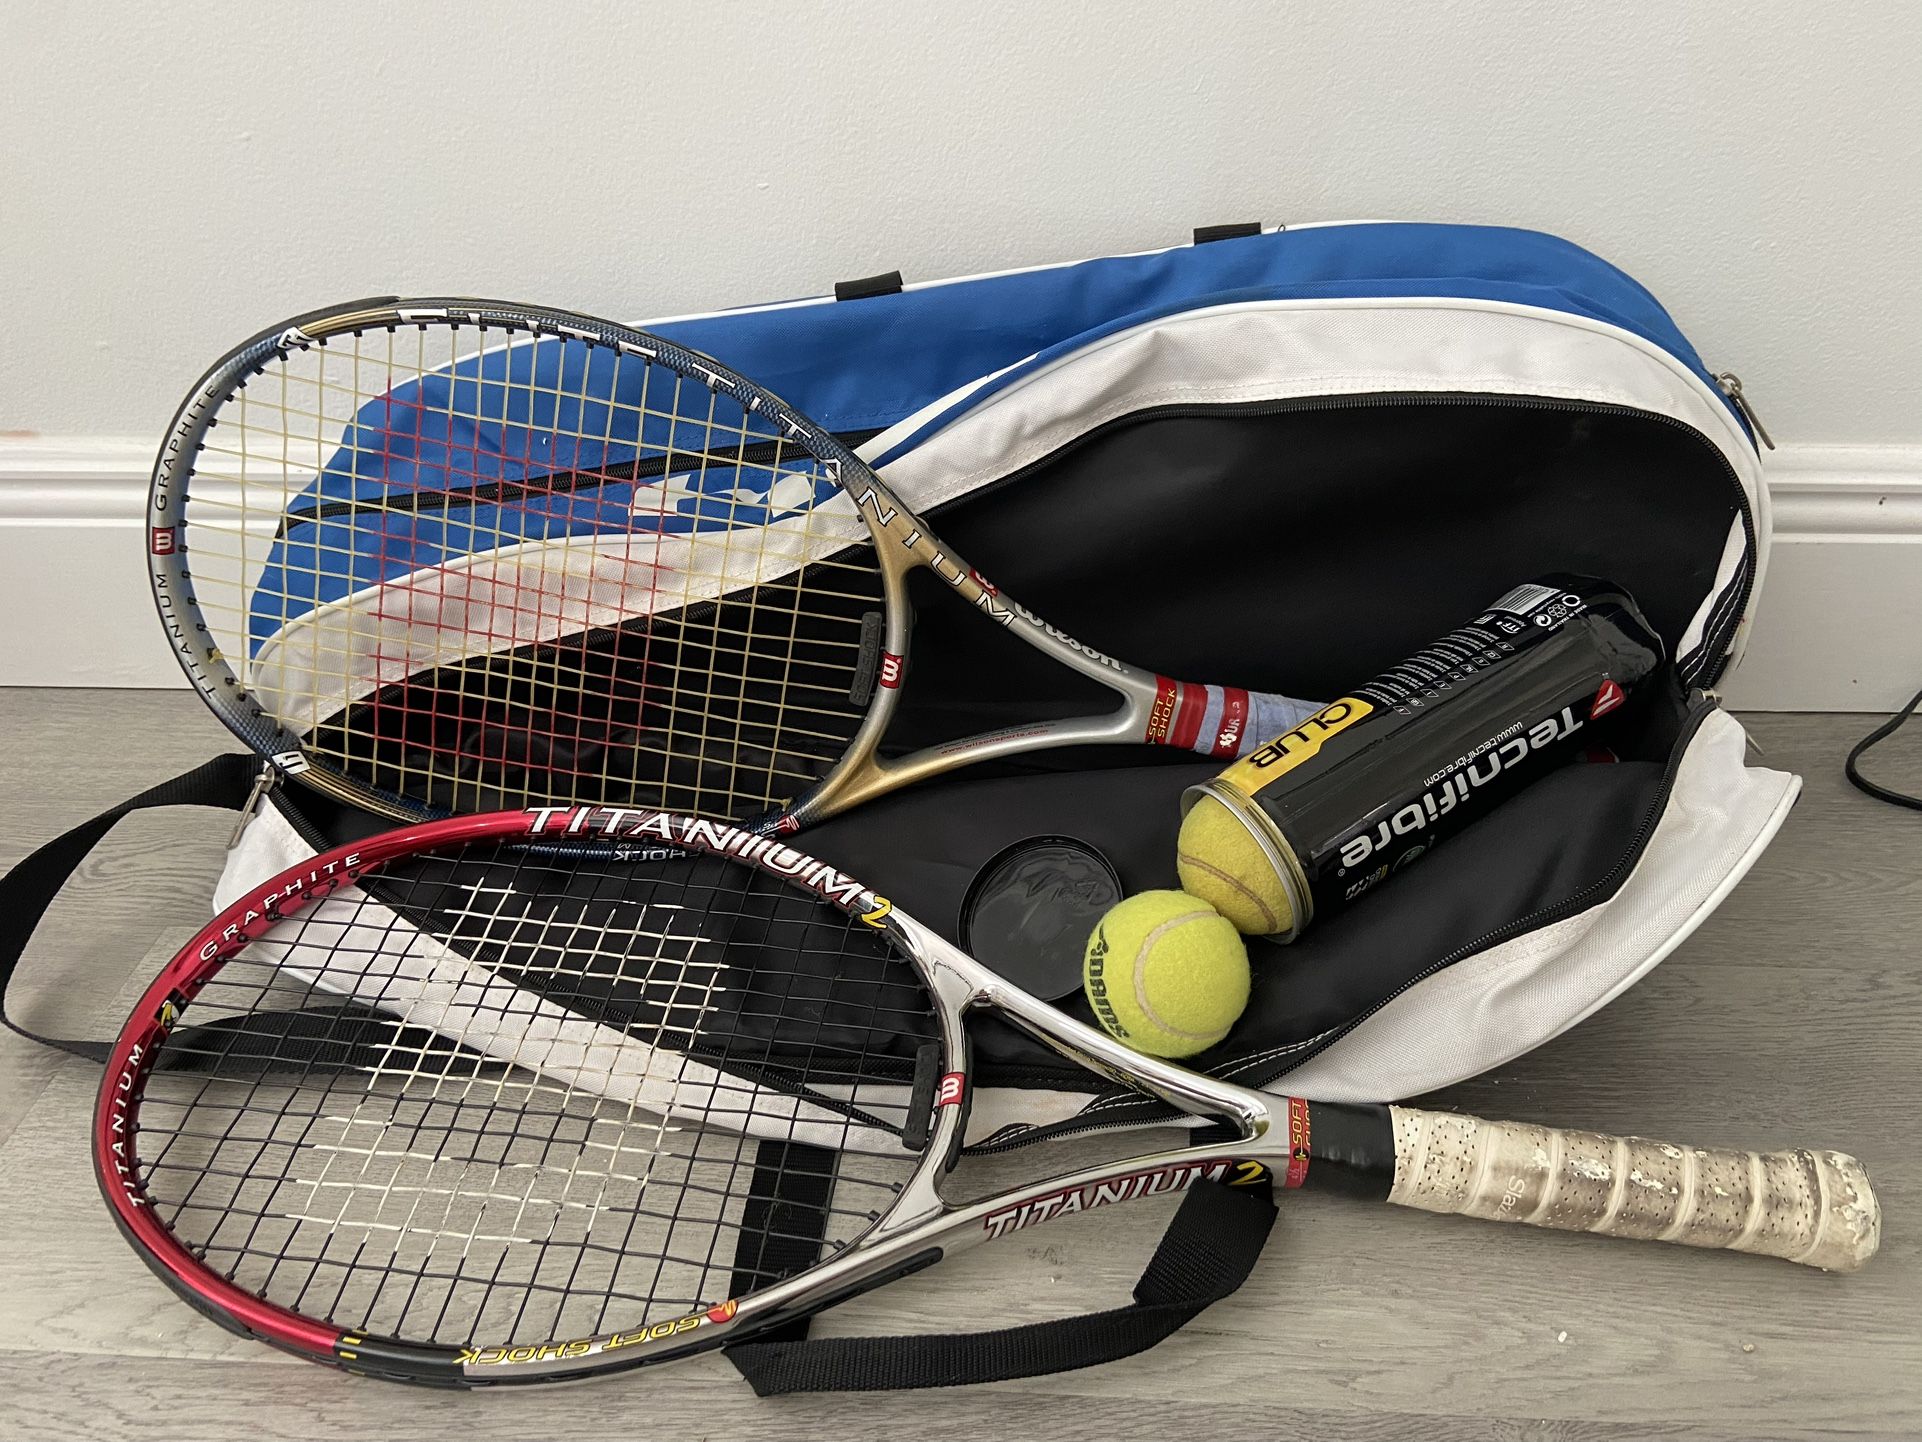 Two Tennis Rackets With Carrier Bag And Three Tênis Balls